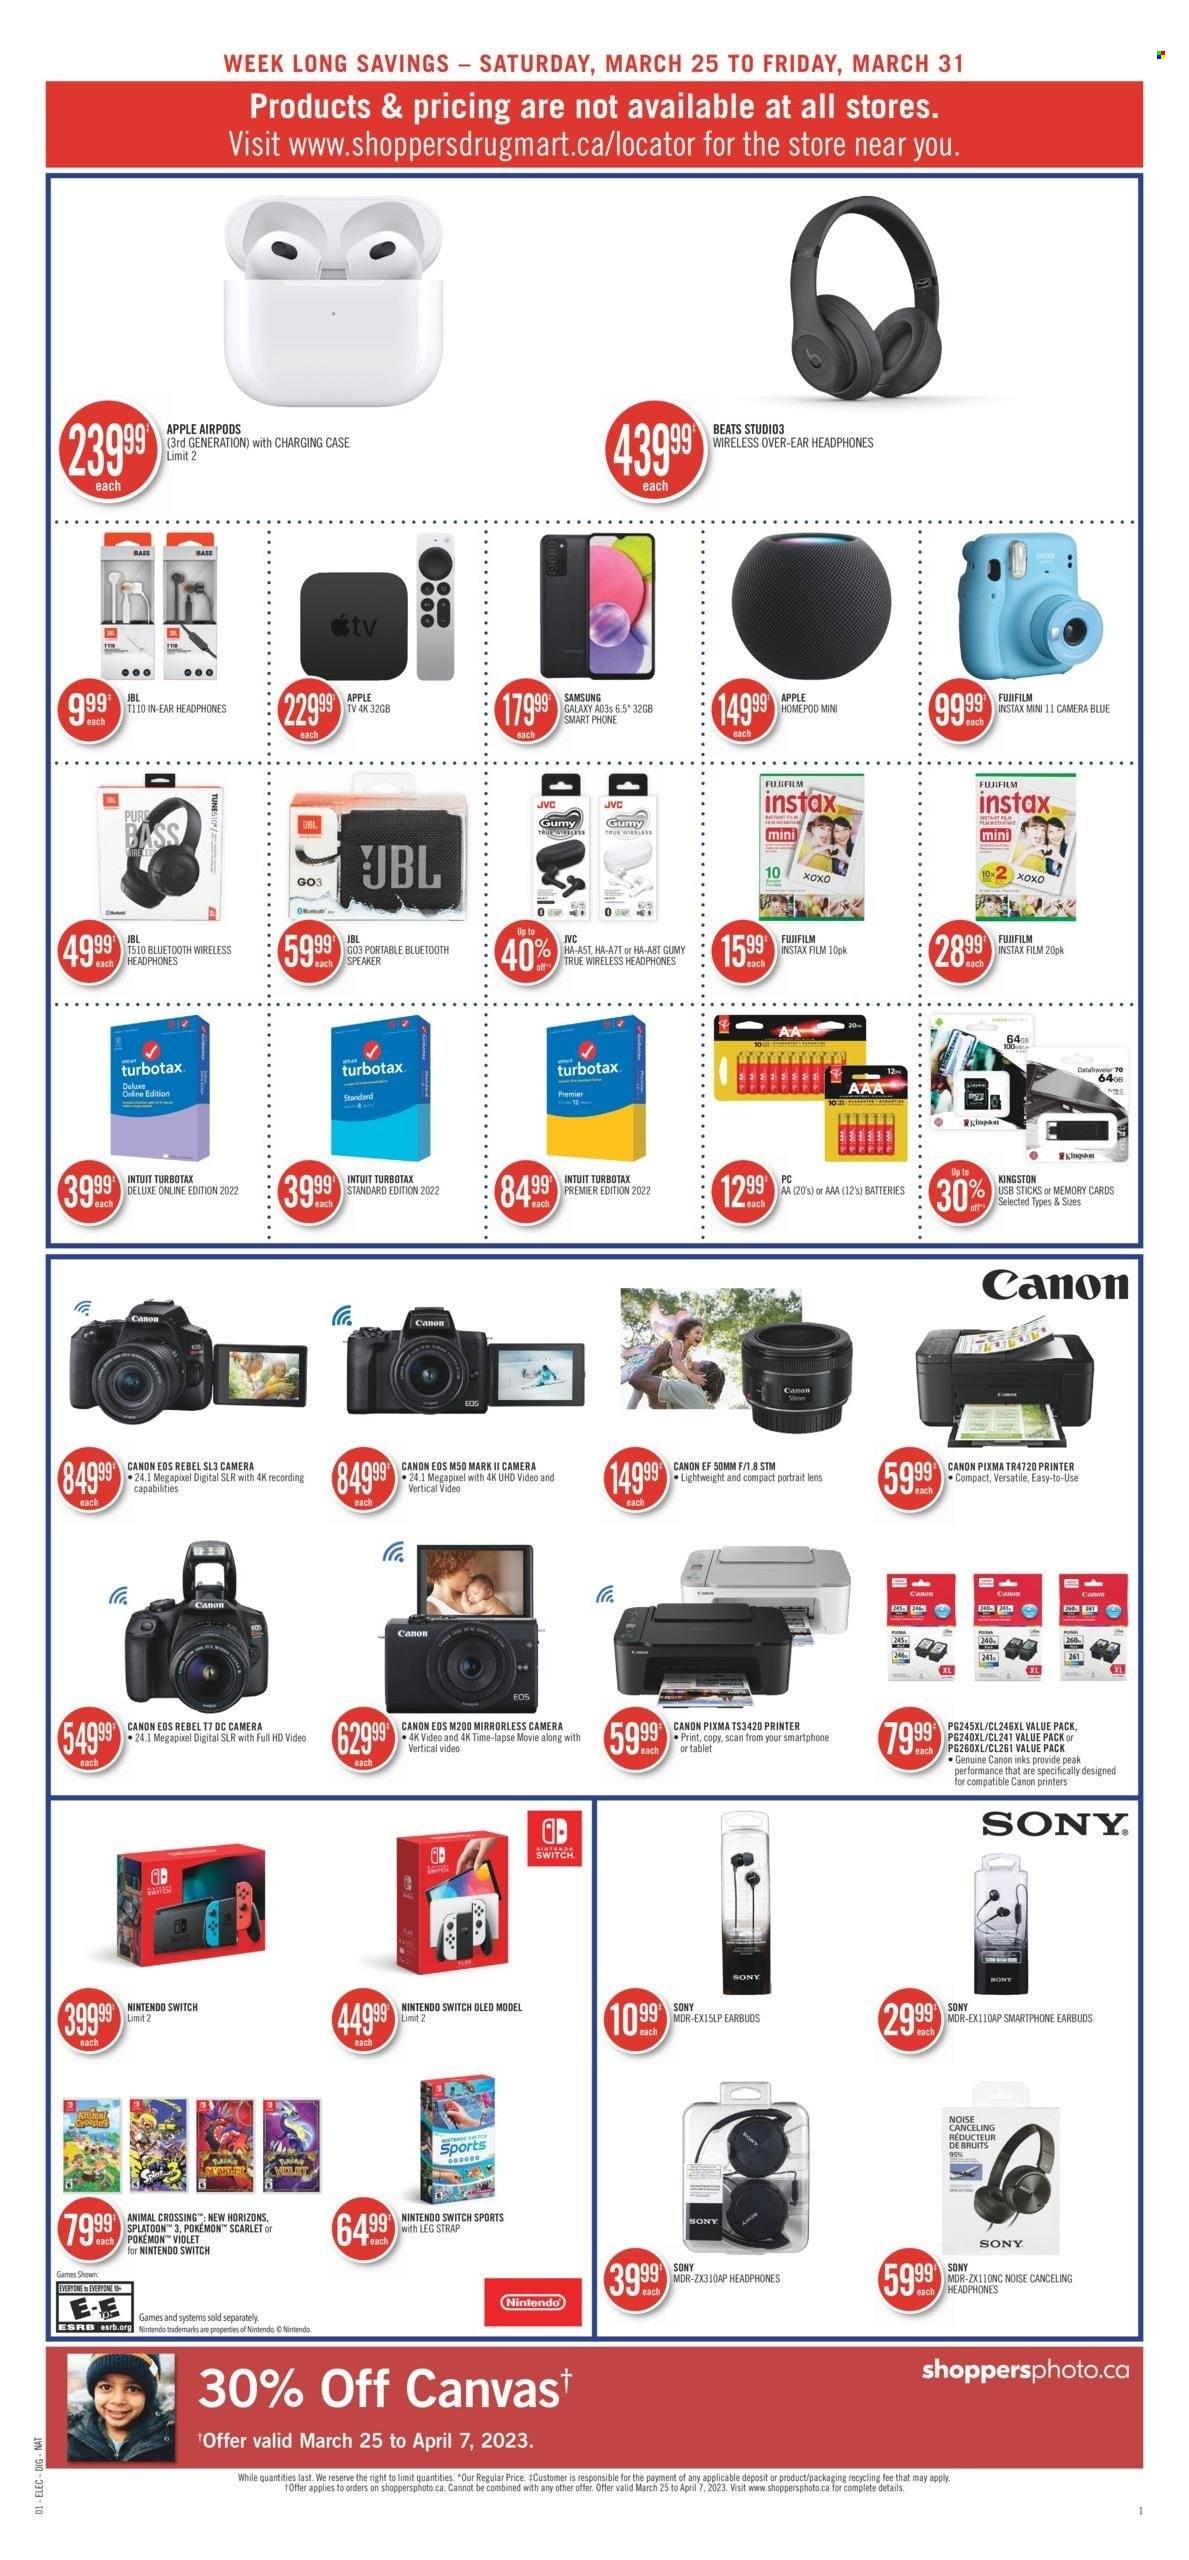 thumbnail - Shoppers Drug Mart Flyer - March 25, 2023 - March 31, 2023 - Sales products - Sony, Nintendo Switch, Apple, Samsung Galaxy, Pokémon, battery, Samsung, lens, mirrorless camera, JVC, fujifilm, speaker, bluetooth speaker, Beats, wireless headphones, headphones, Airpods, earbuds, printer, camera, Canon, JBL. Page 8.